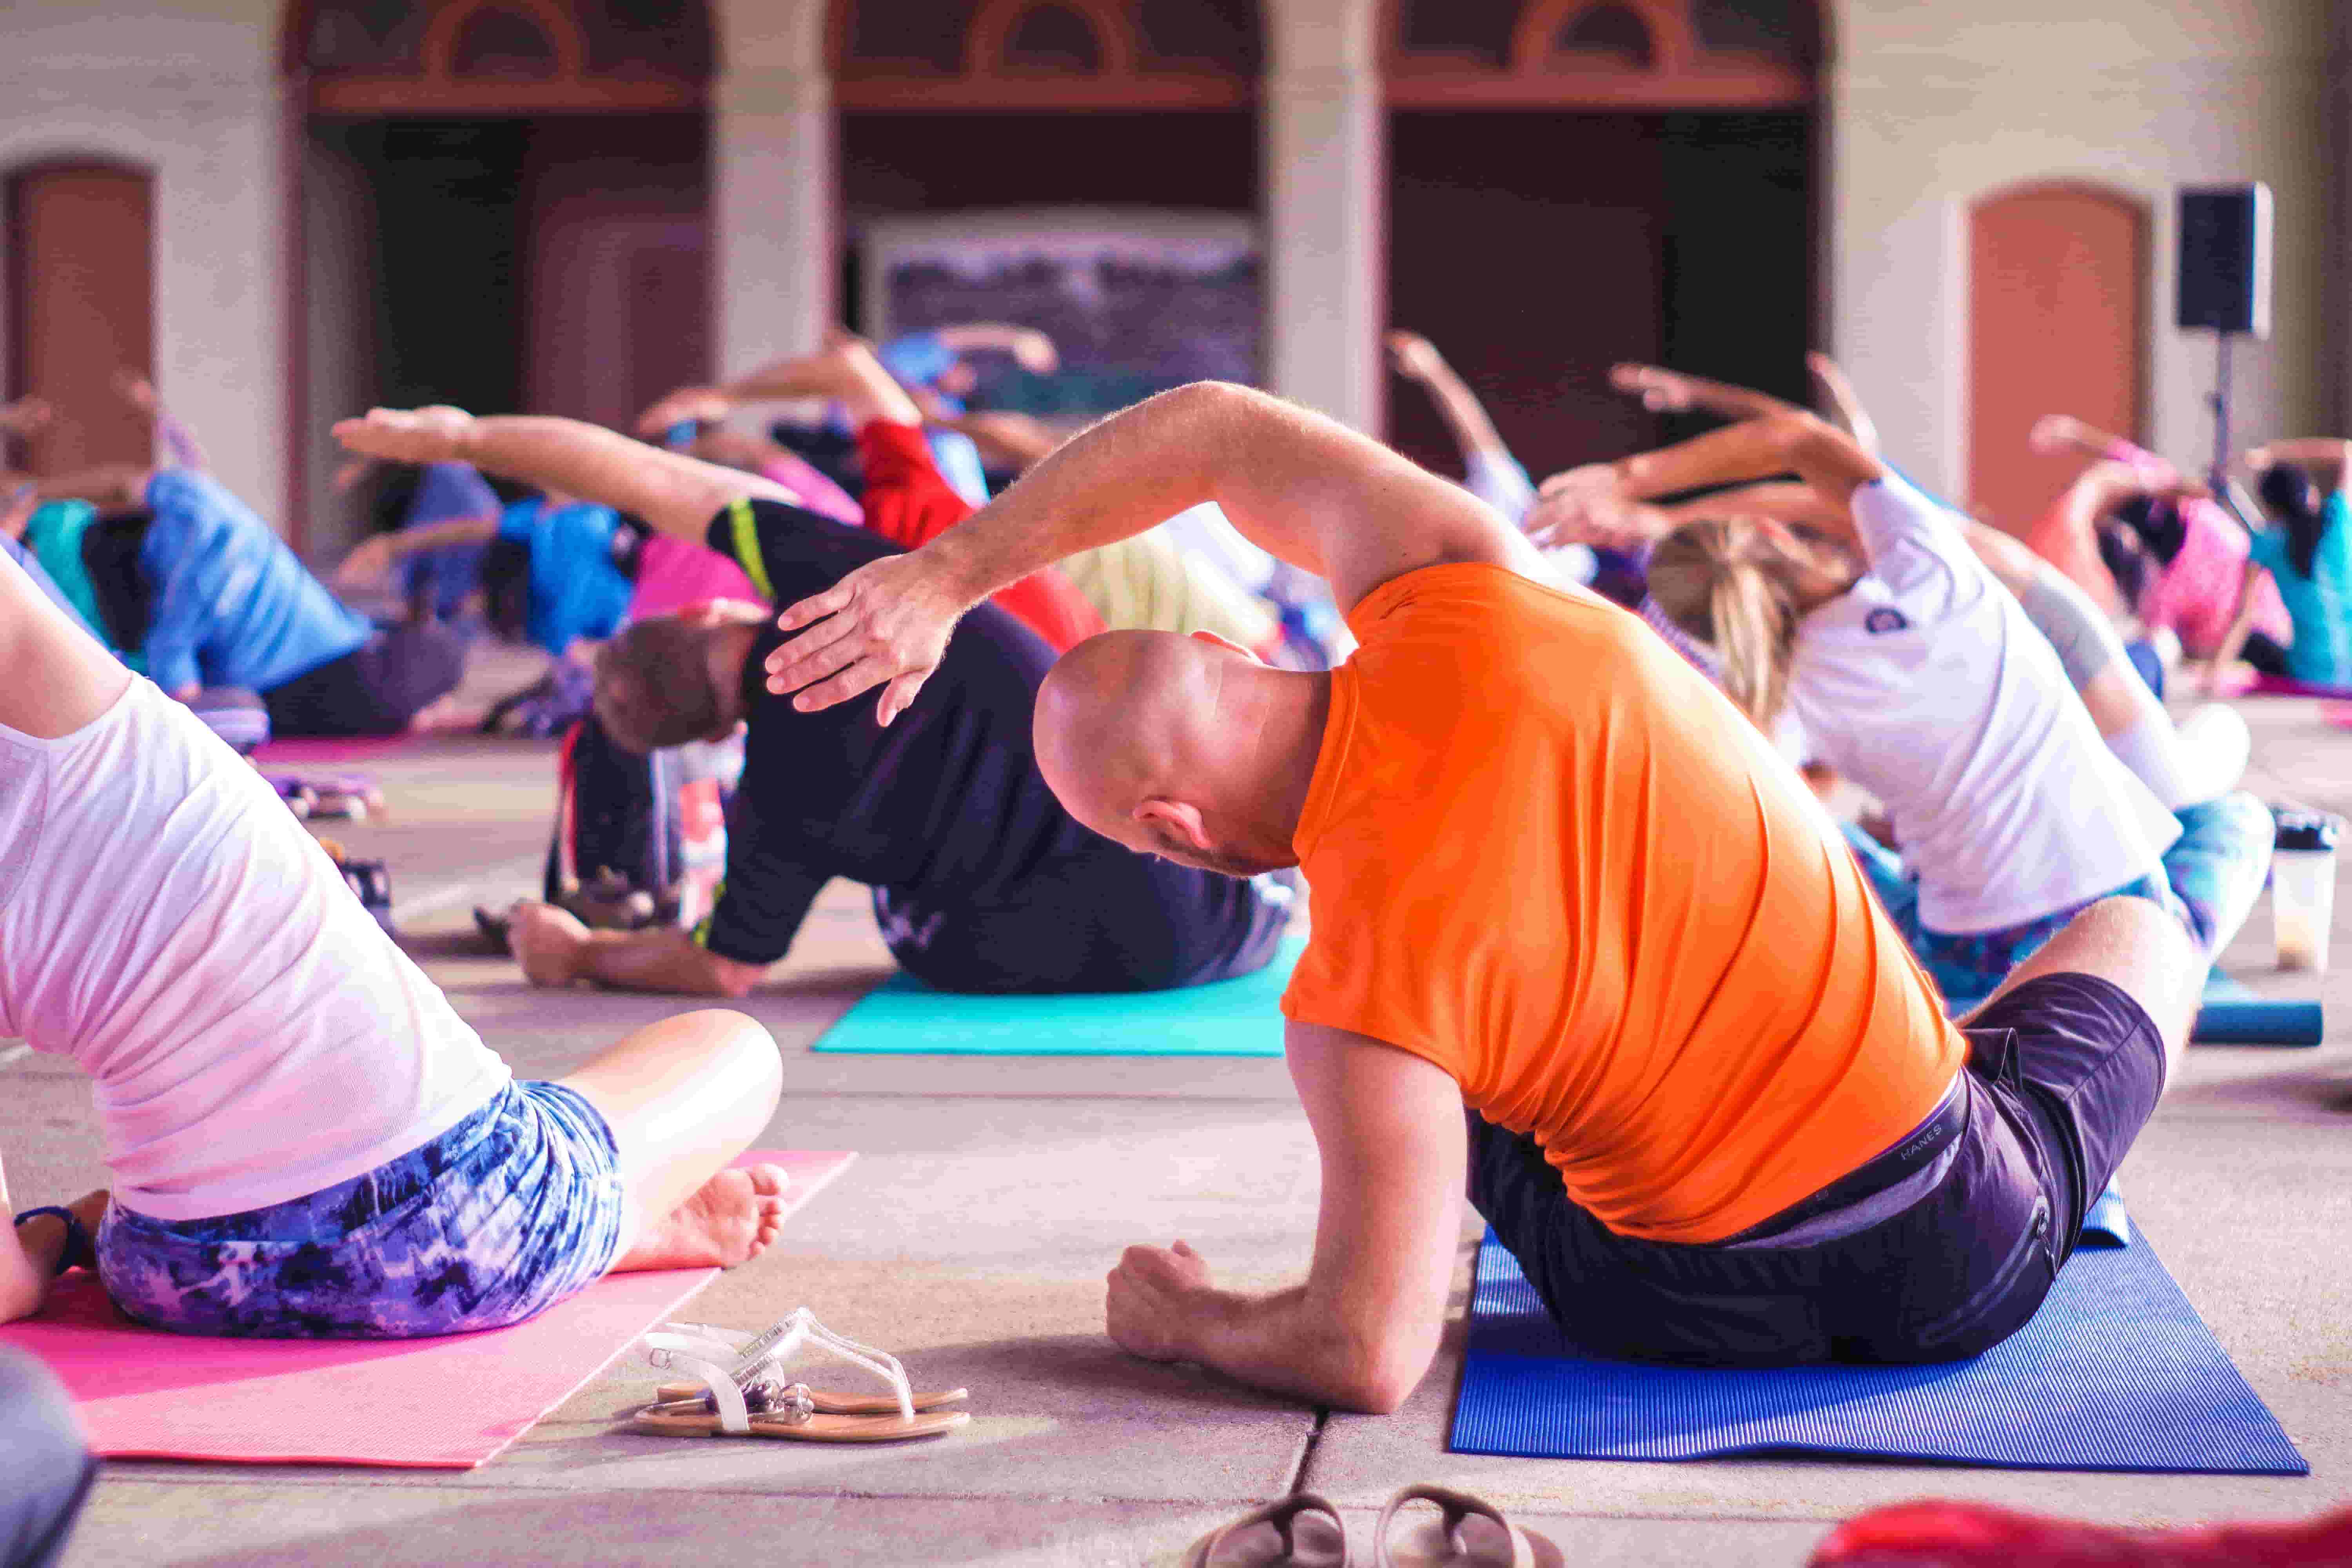 A middle-aged man takes part in a yoga class